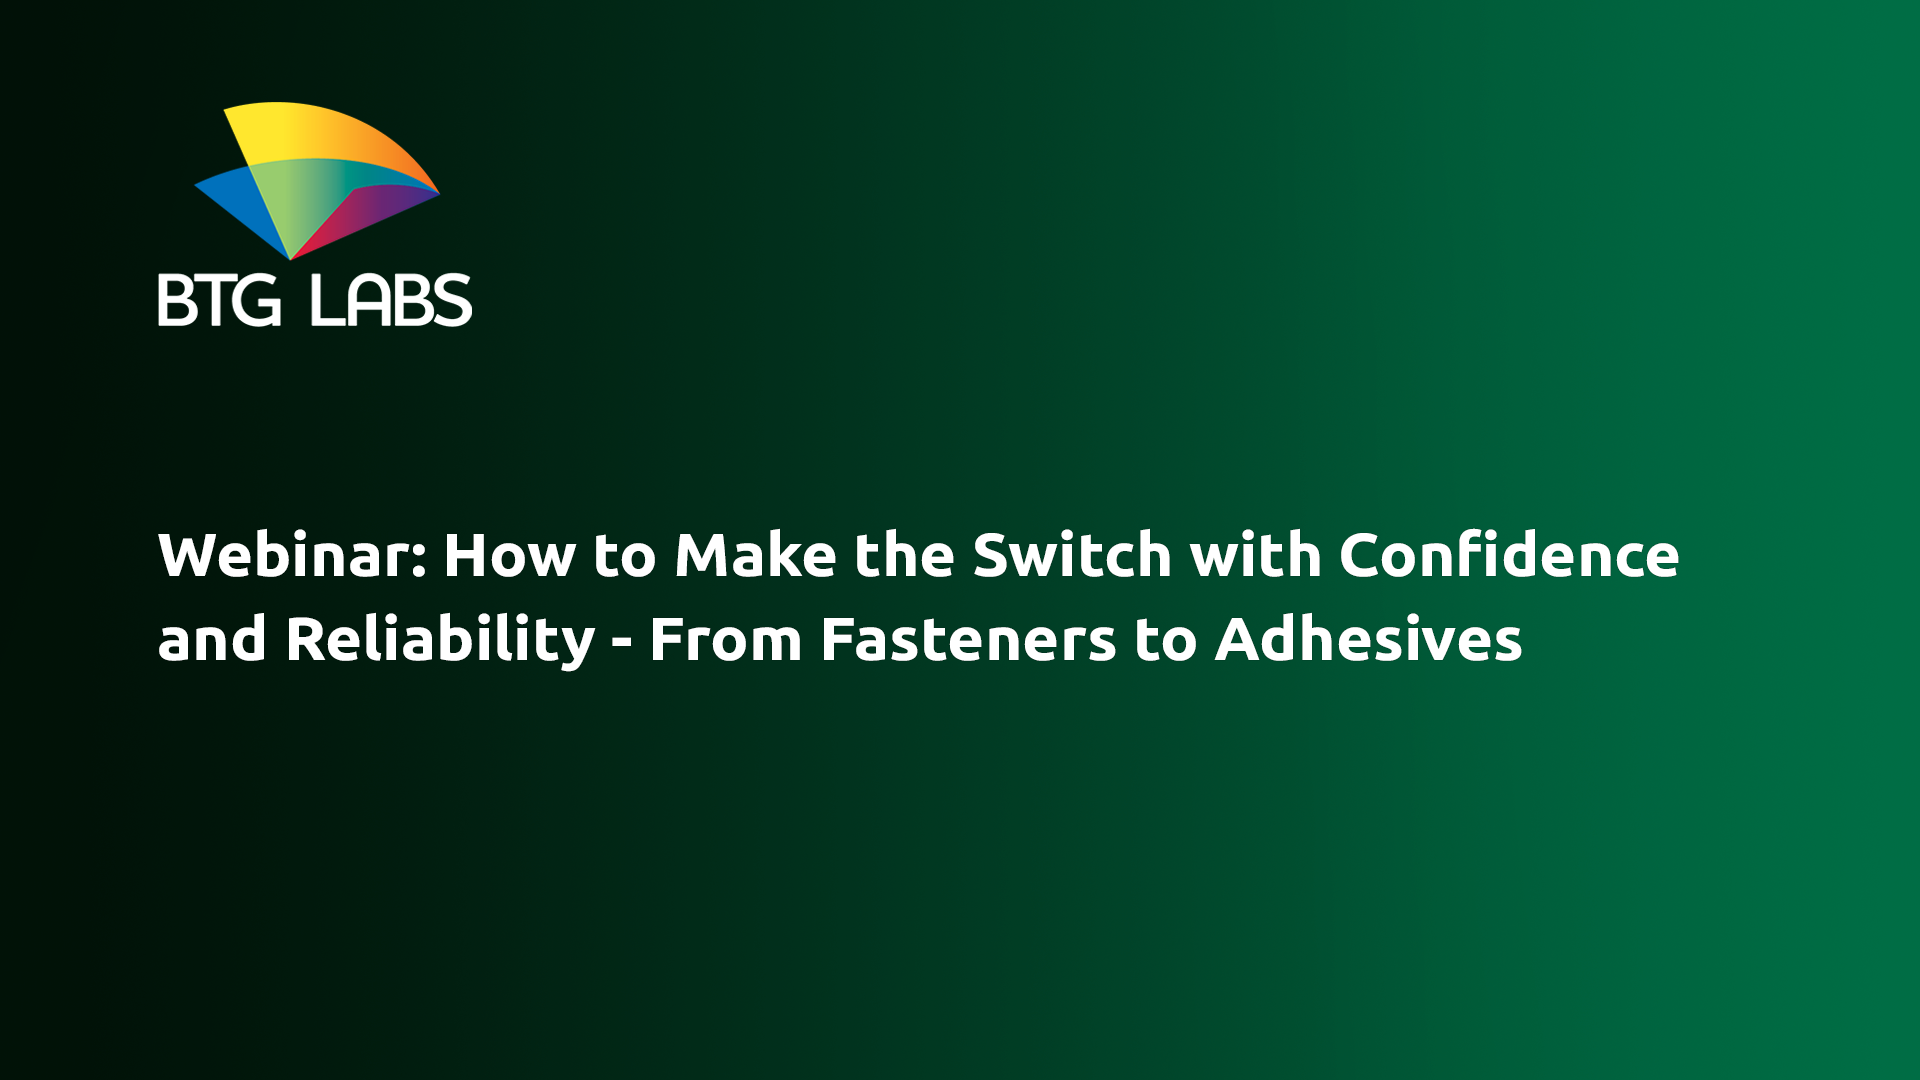 Webinar: How to Make the Switch with Confidence and Reliability - From Fasteners to Adhesives